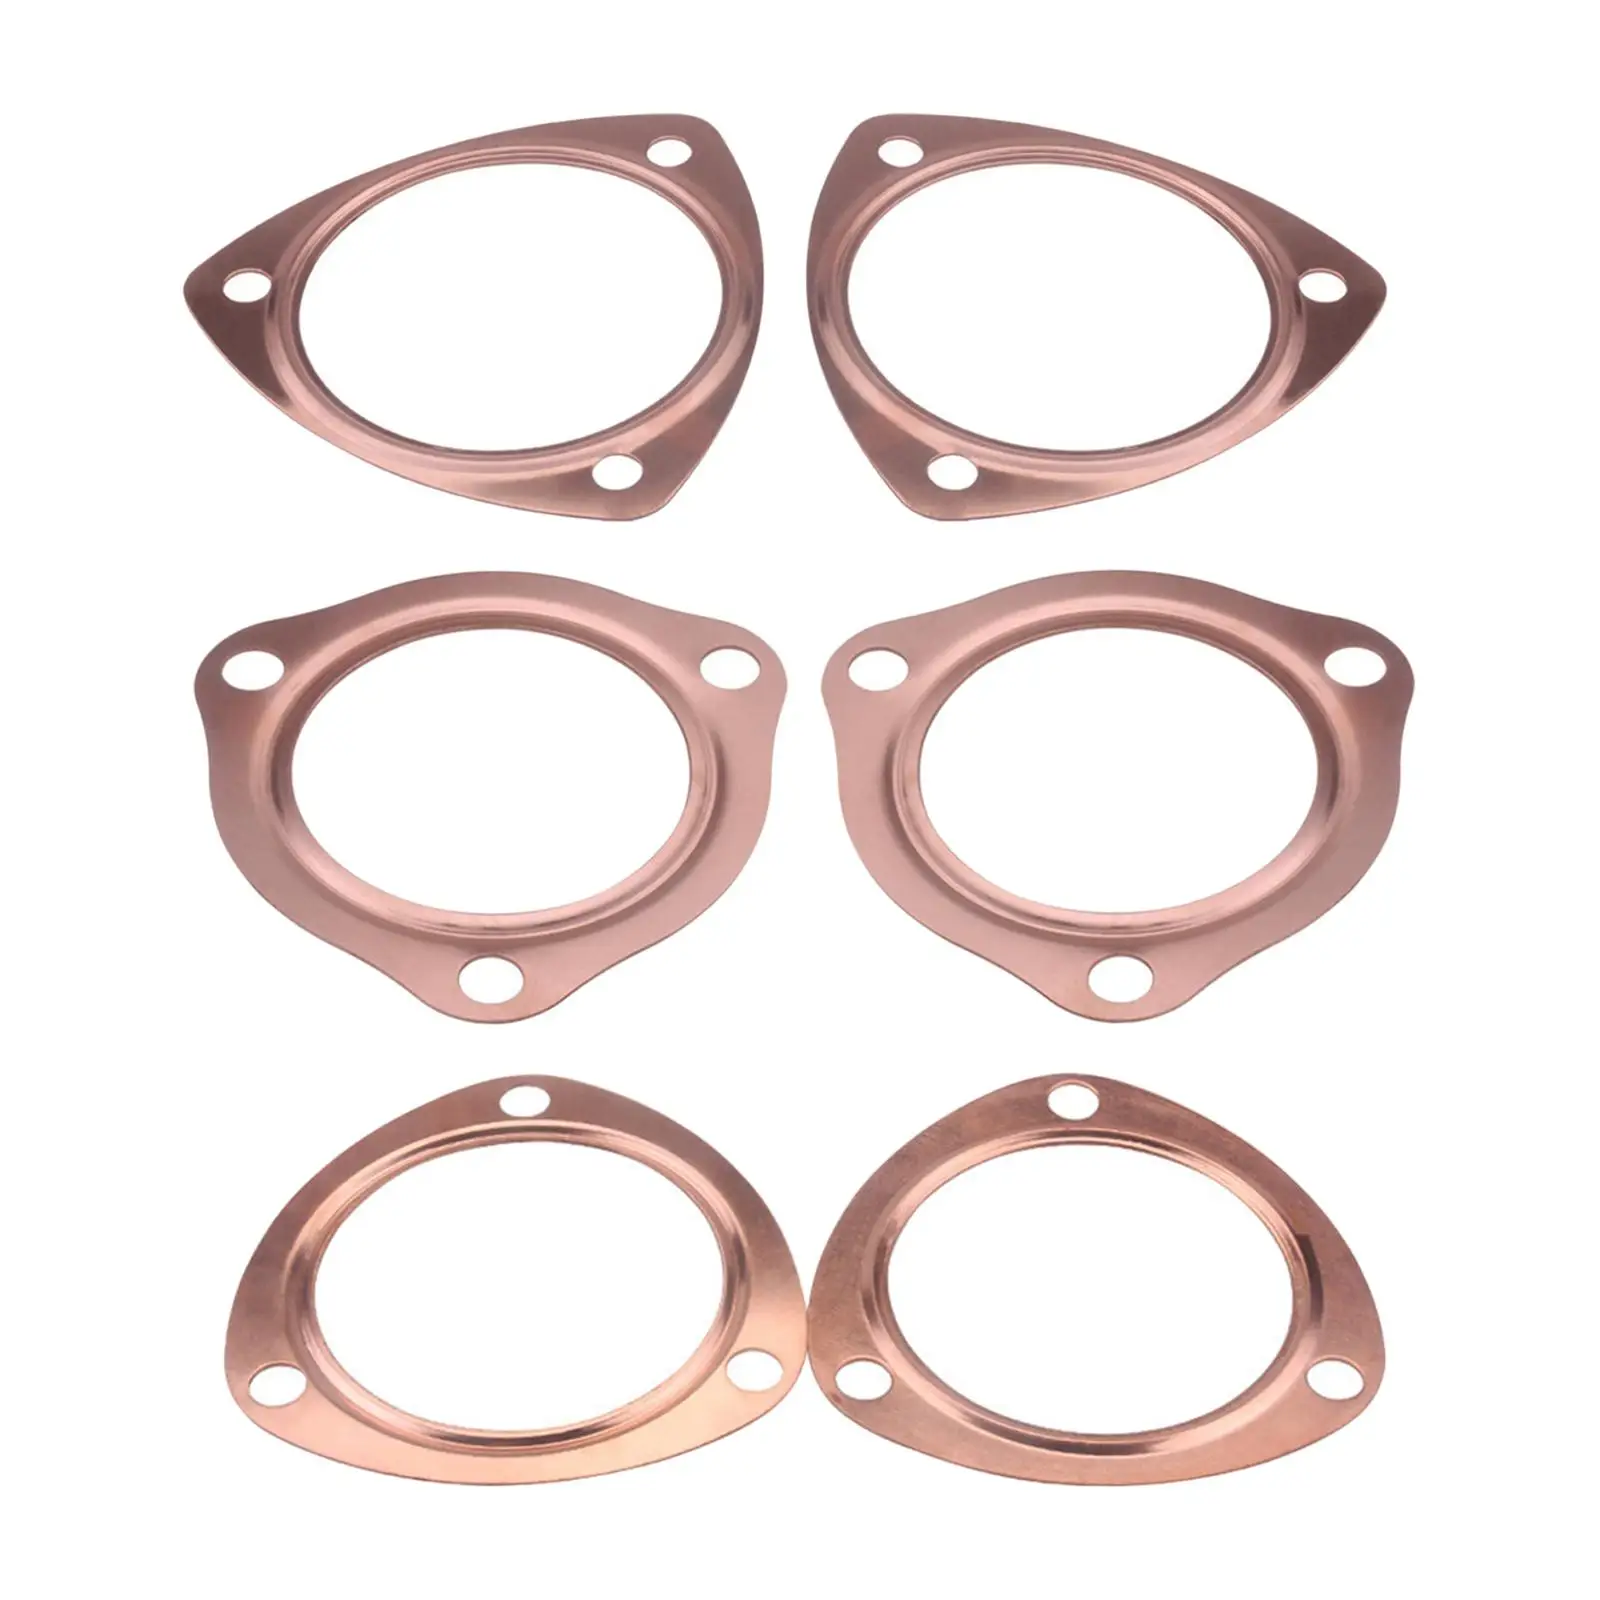 Copper Collector Gasket Anti Strike Colorfast Wear Resisting for Sbc Bbc 302 350 454 Automobile Direct Replaces Spare Parts